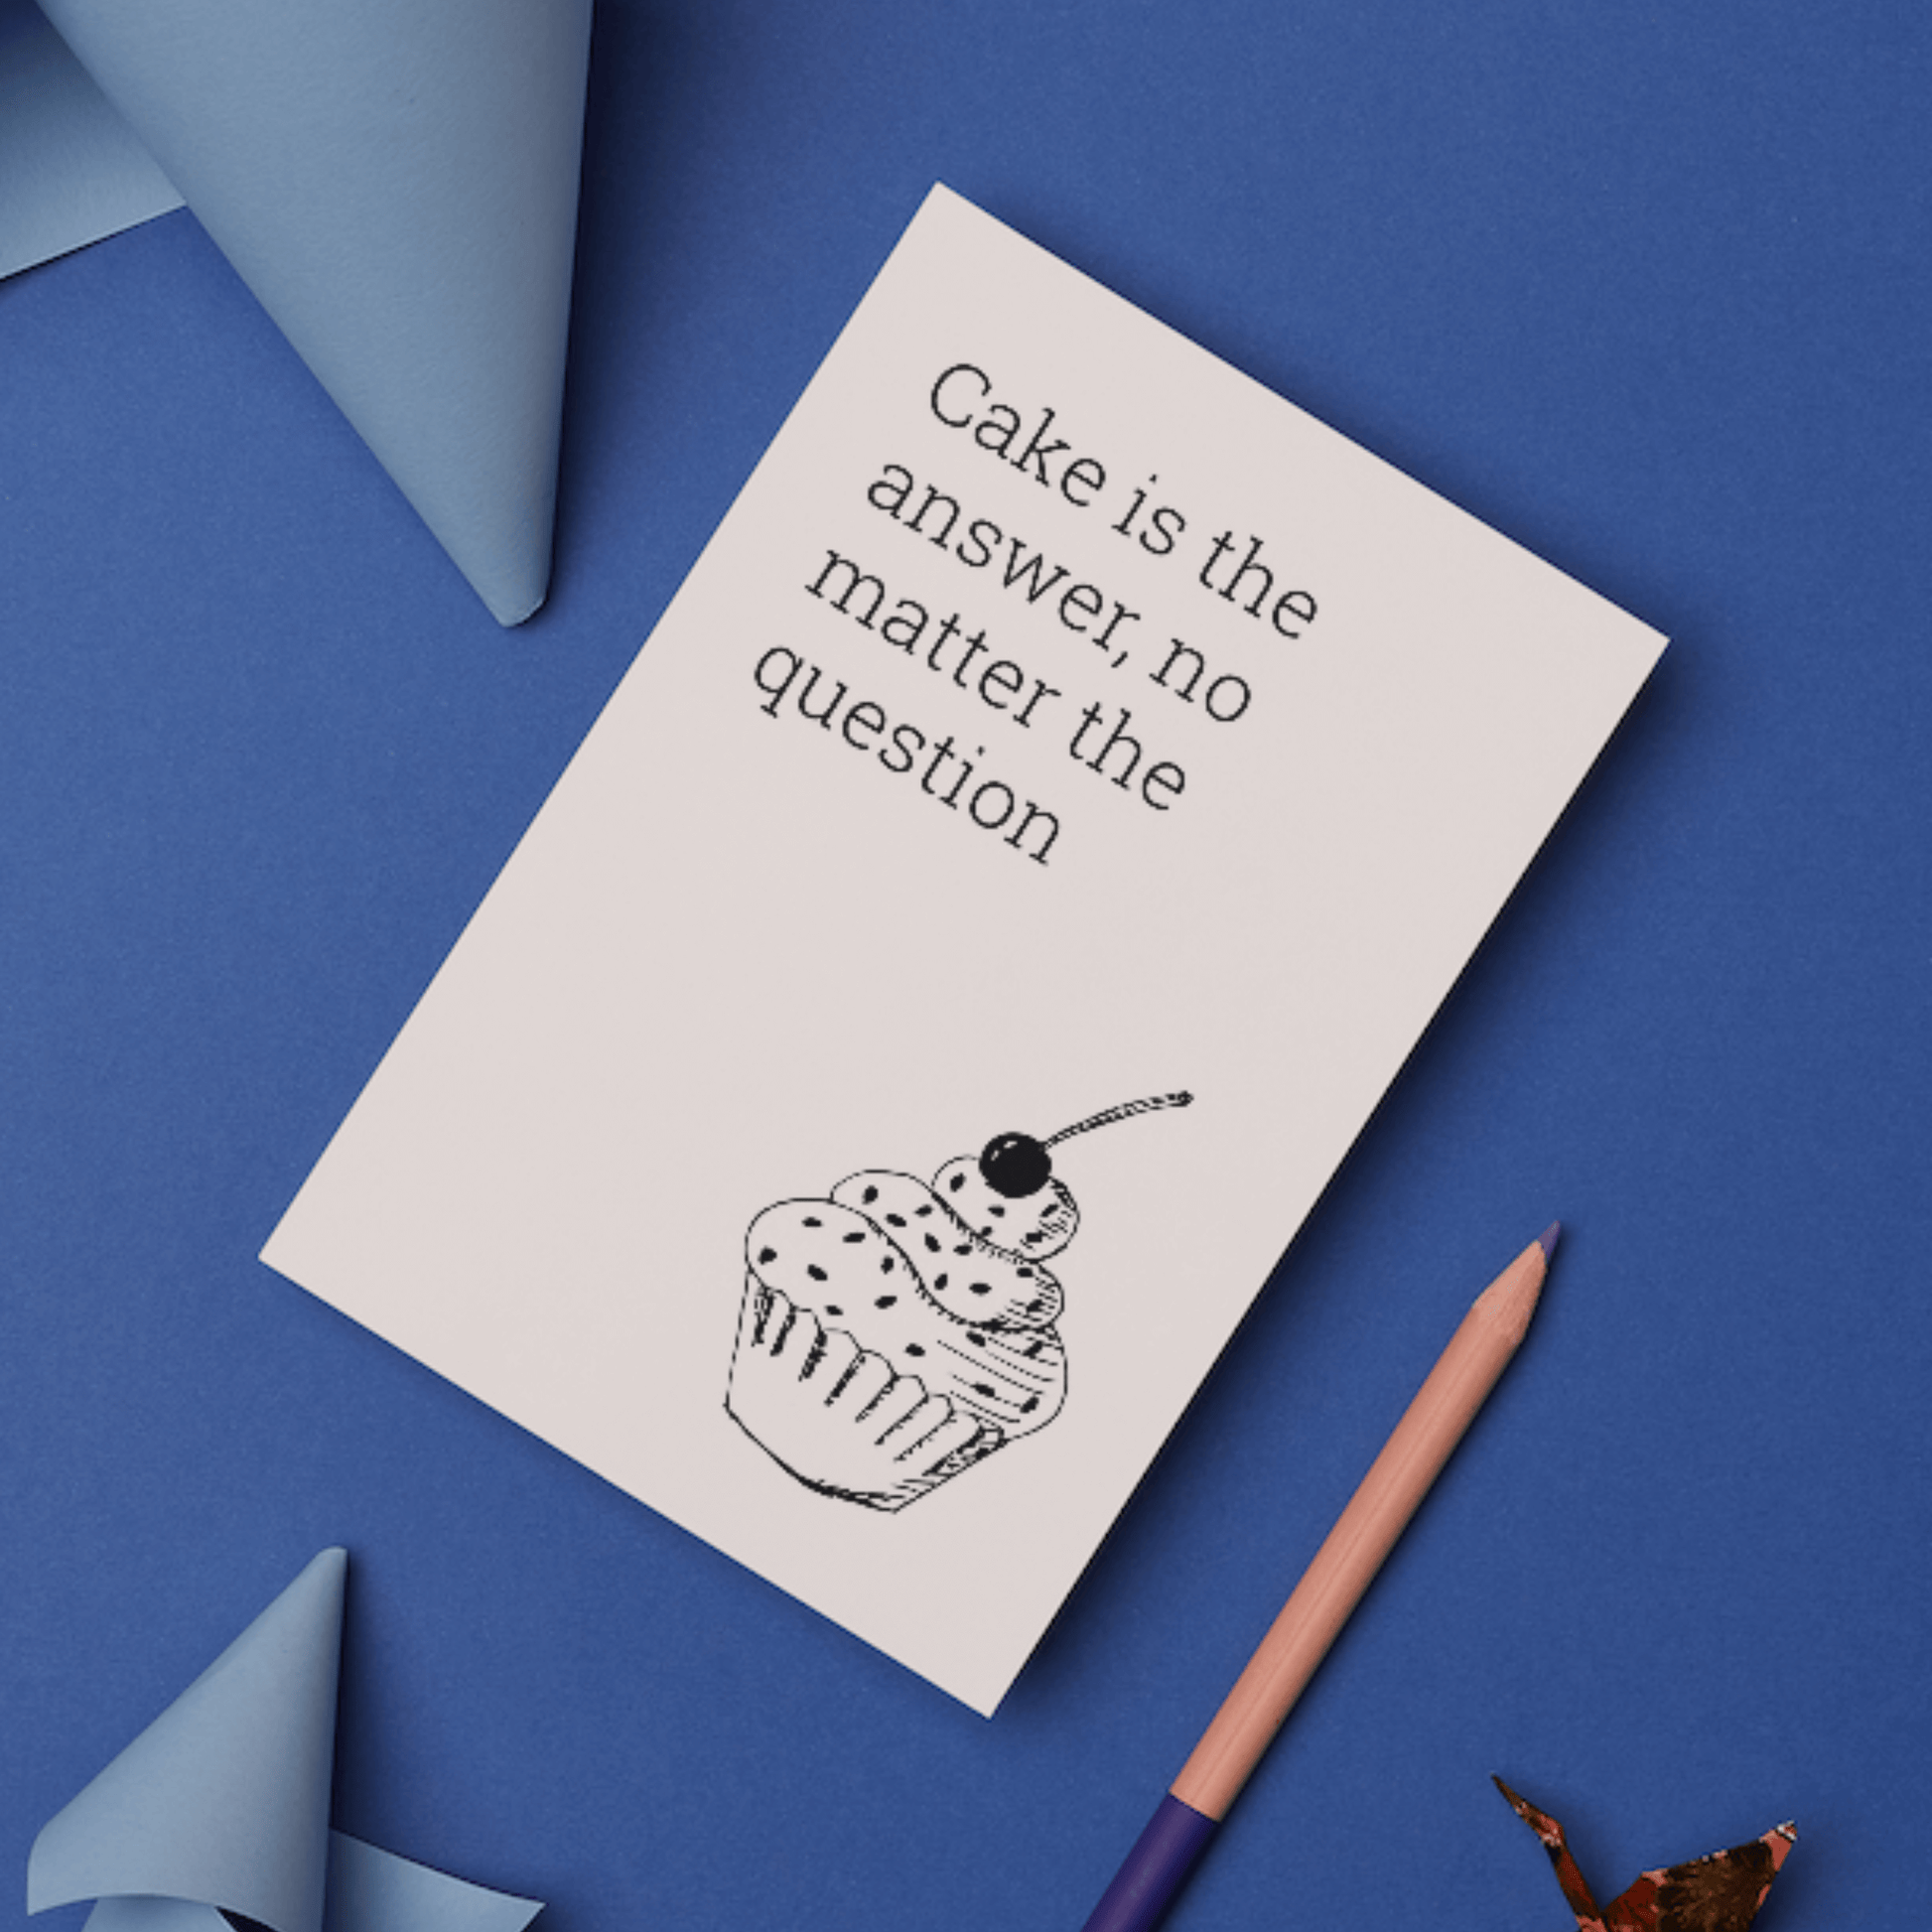 Little Kraken's Cake is The Answer, No Matter the Question | Cupcake Greeting Card, General Cards for £3.50 each